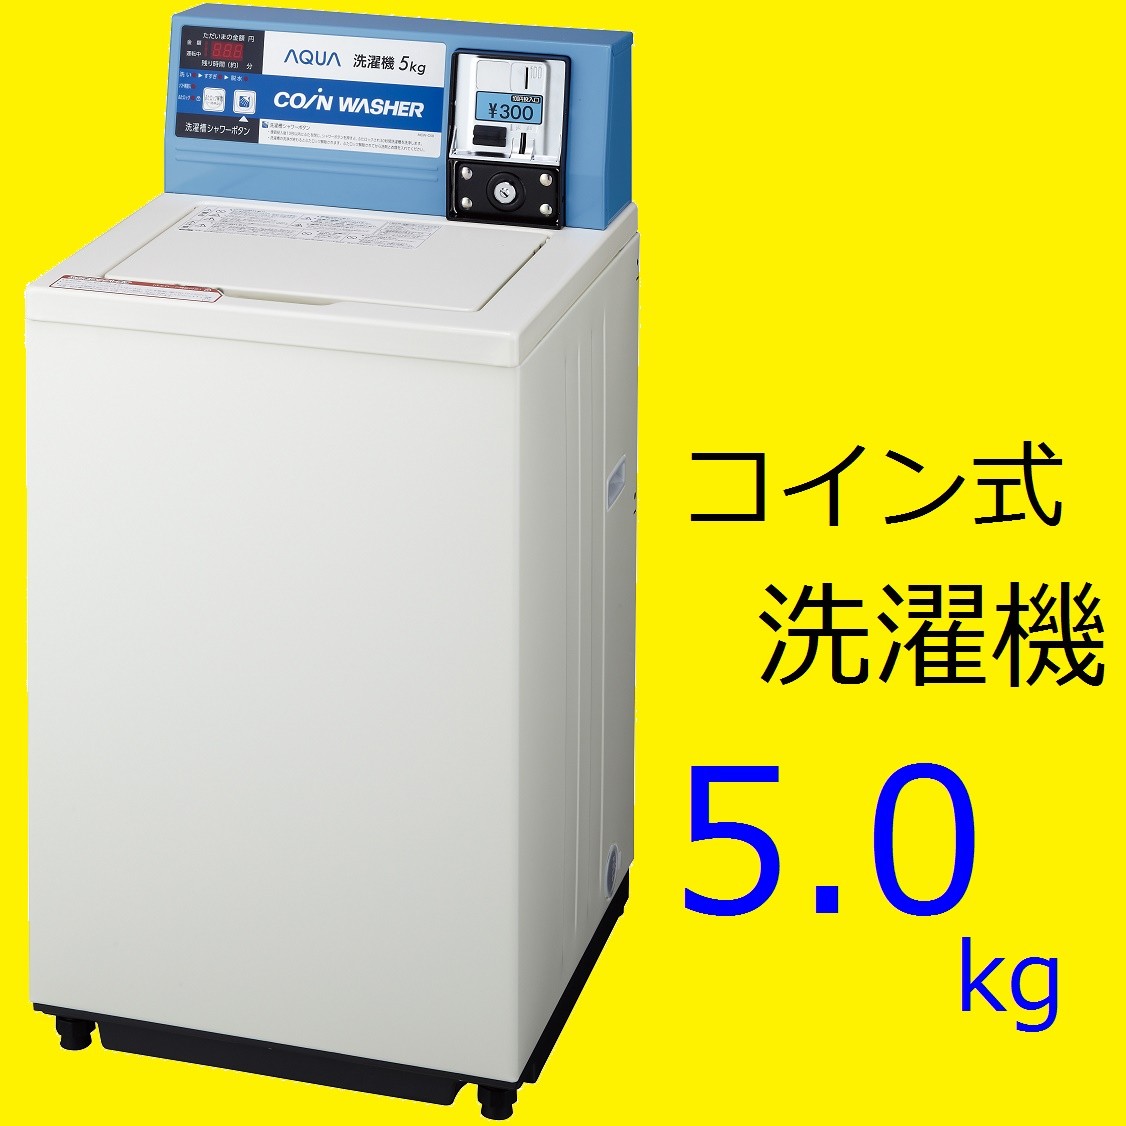  safe [ regular route : Manufacturers direct delivery ] MCW-C50A[ stock have : approximately 2 business day . shipping ] aqua AQUA business use coin type washing machine white 5kg high a-ru old Sanyo electro- machine 